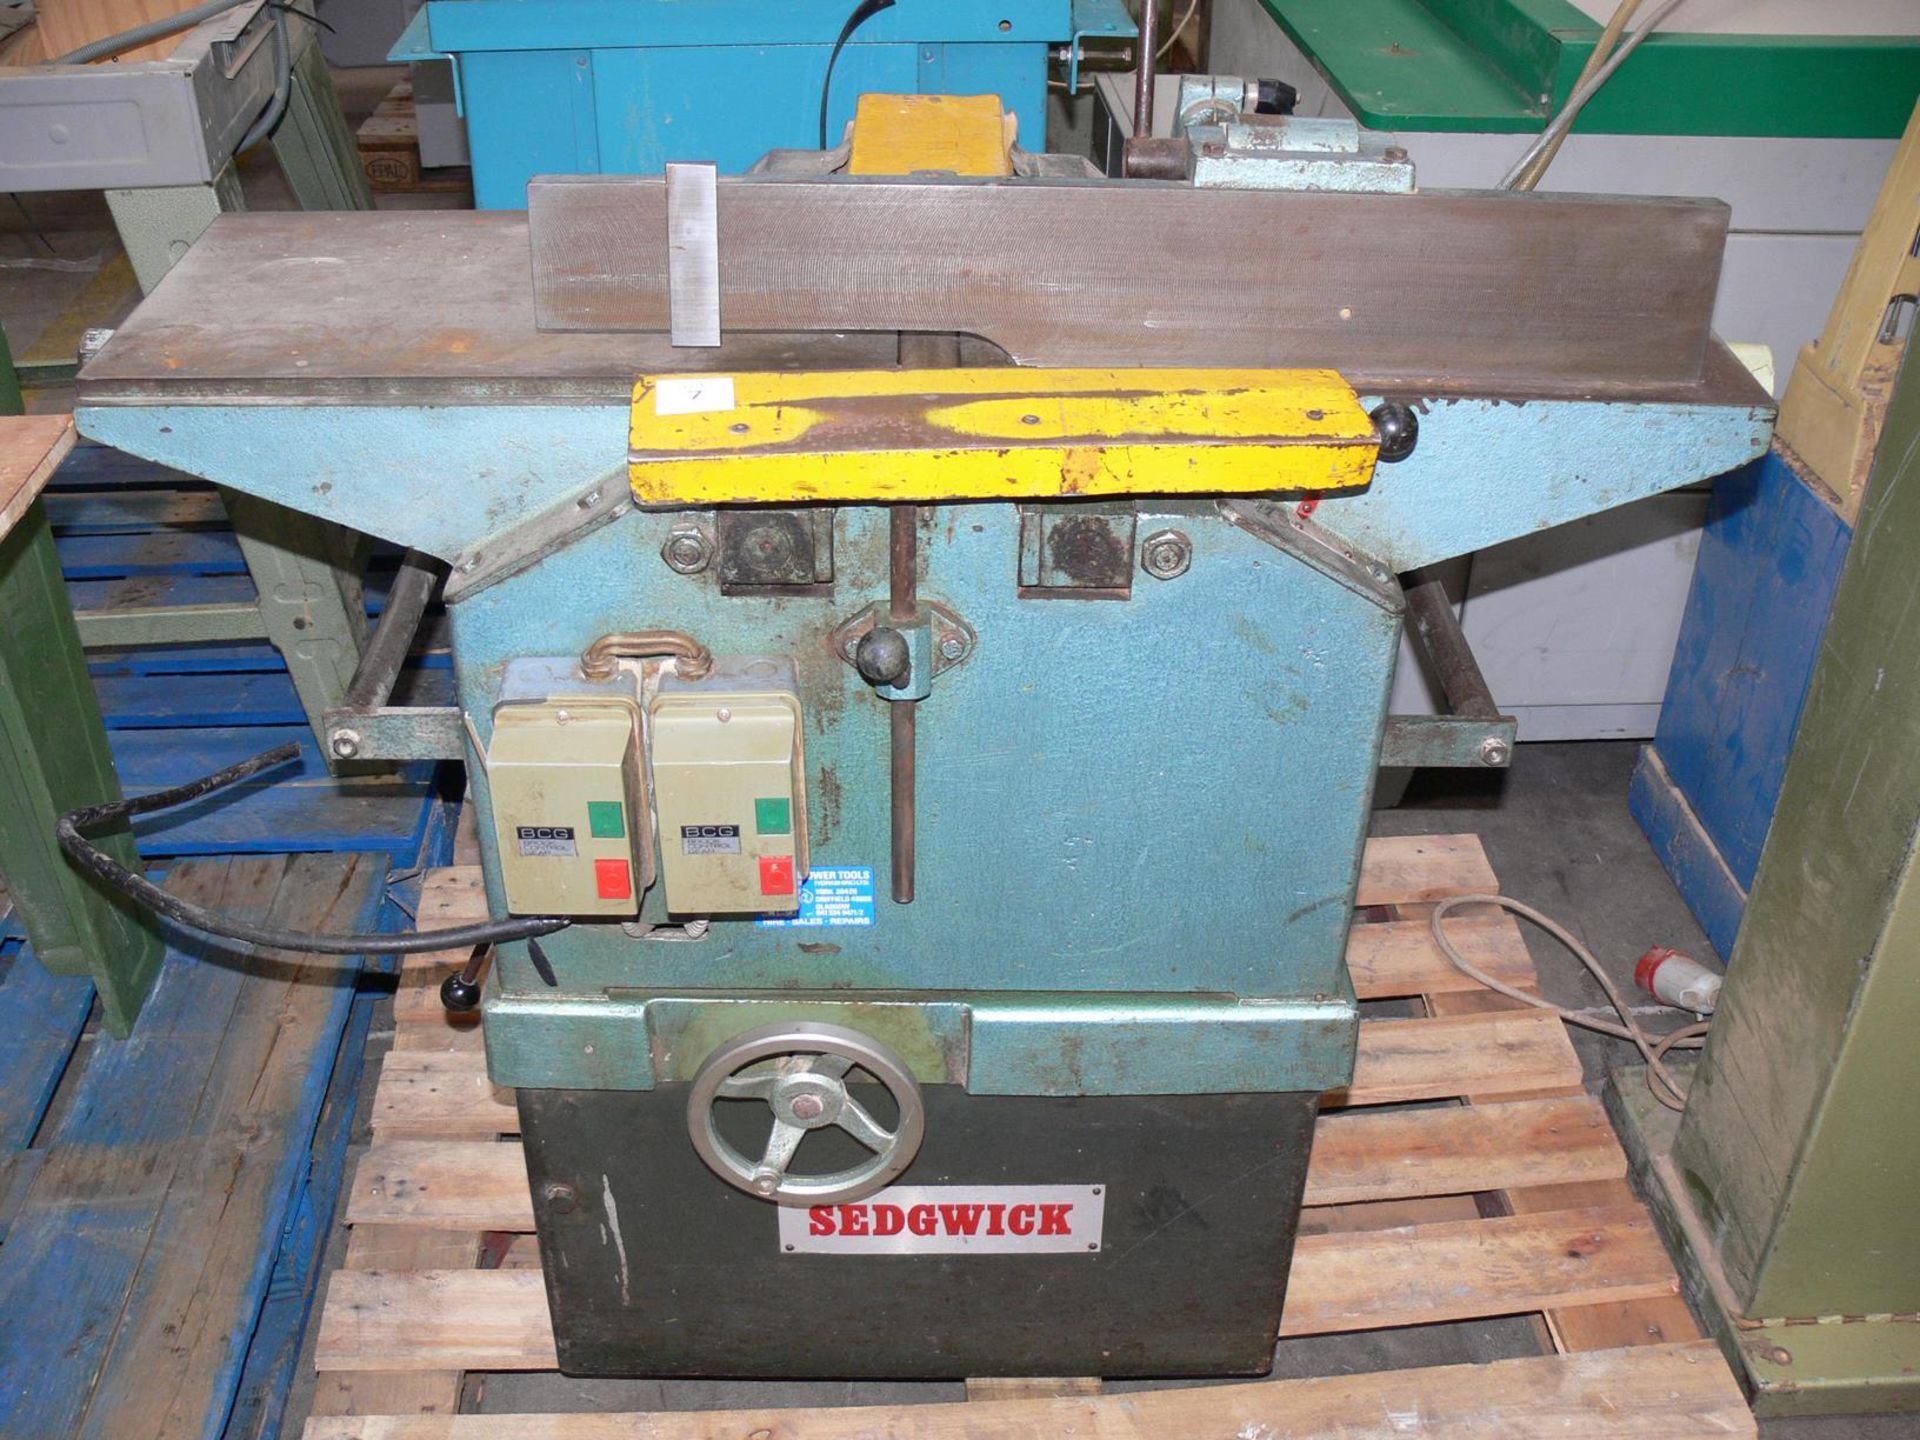 * Sedgwick 12'' MB Planer/Thicknesser, 3PH. Please note there is a £10 + VAT Lift Out Fee on this